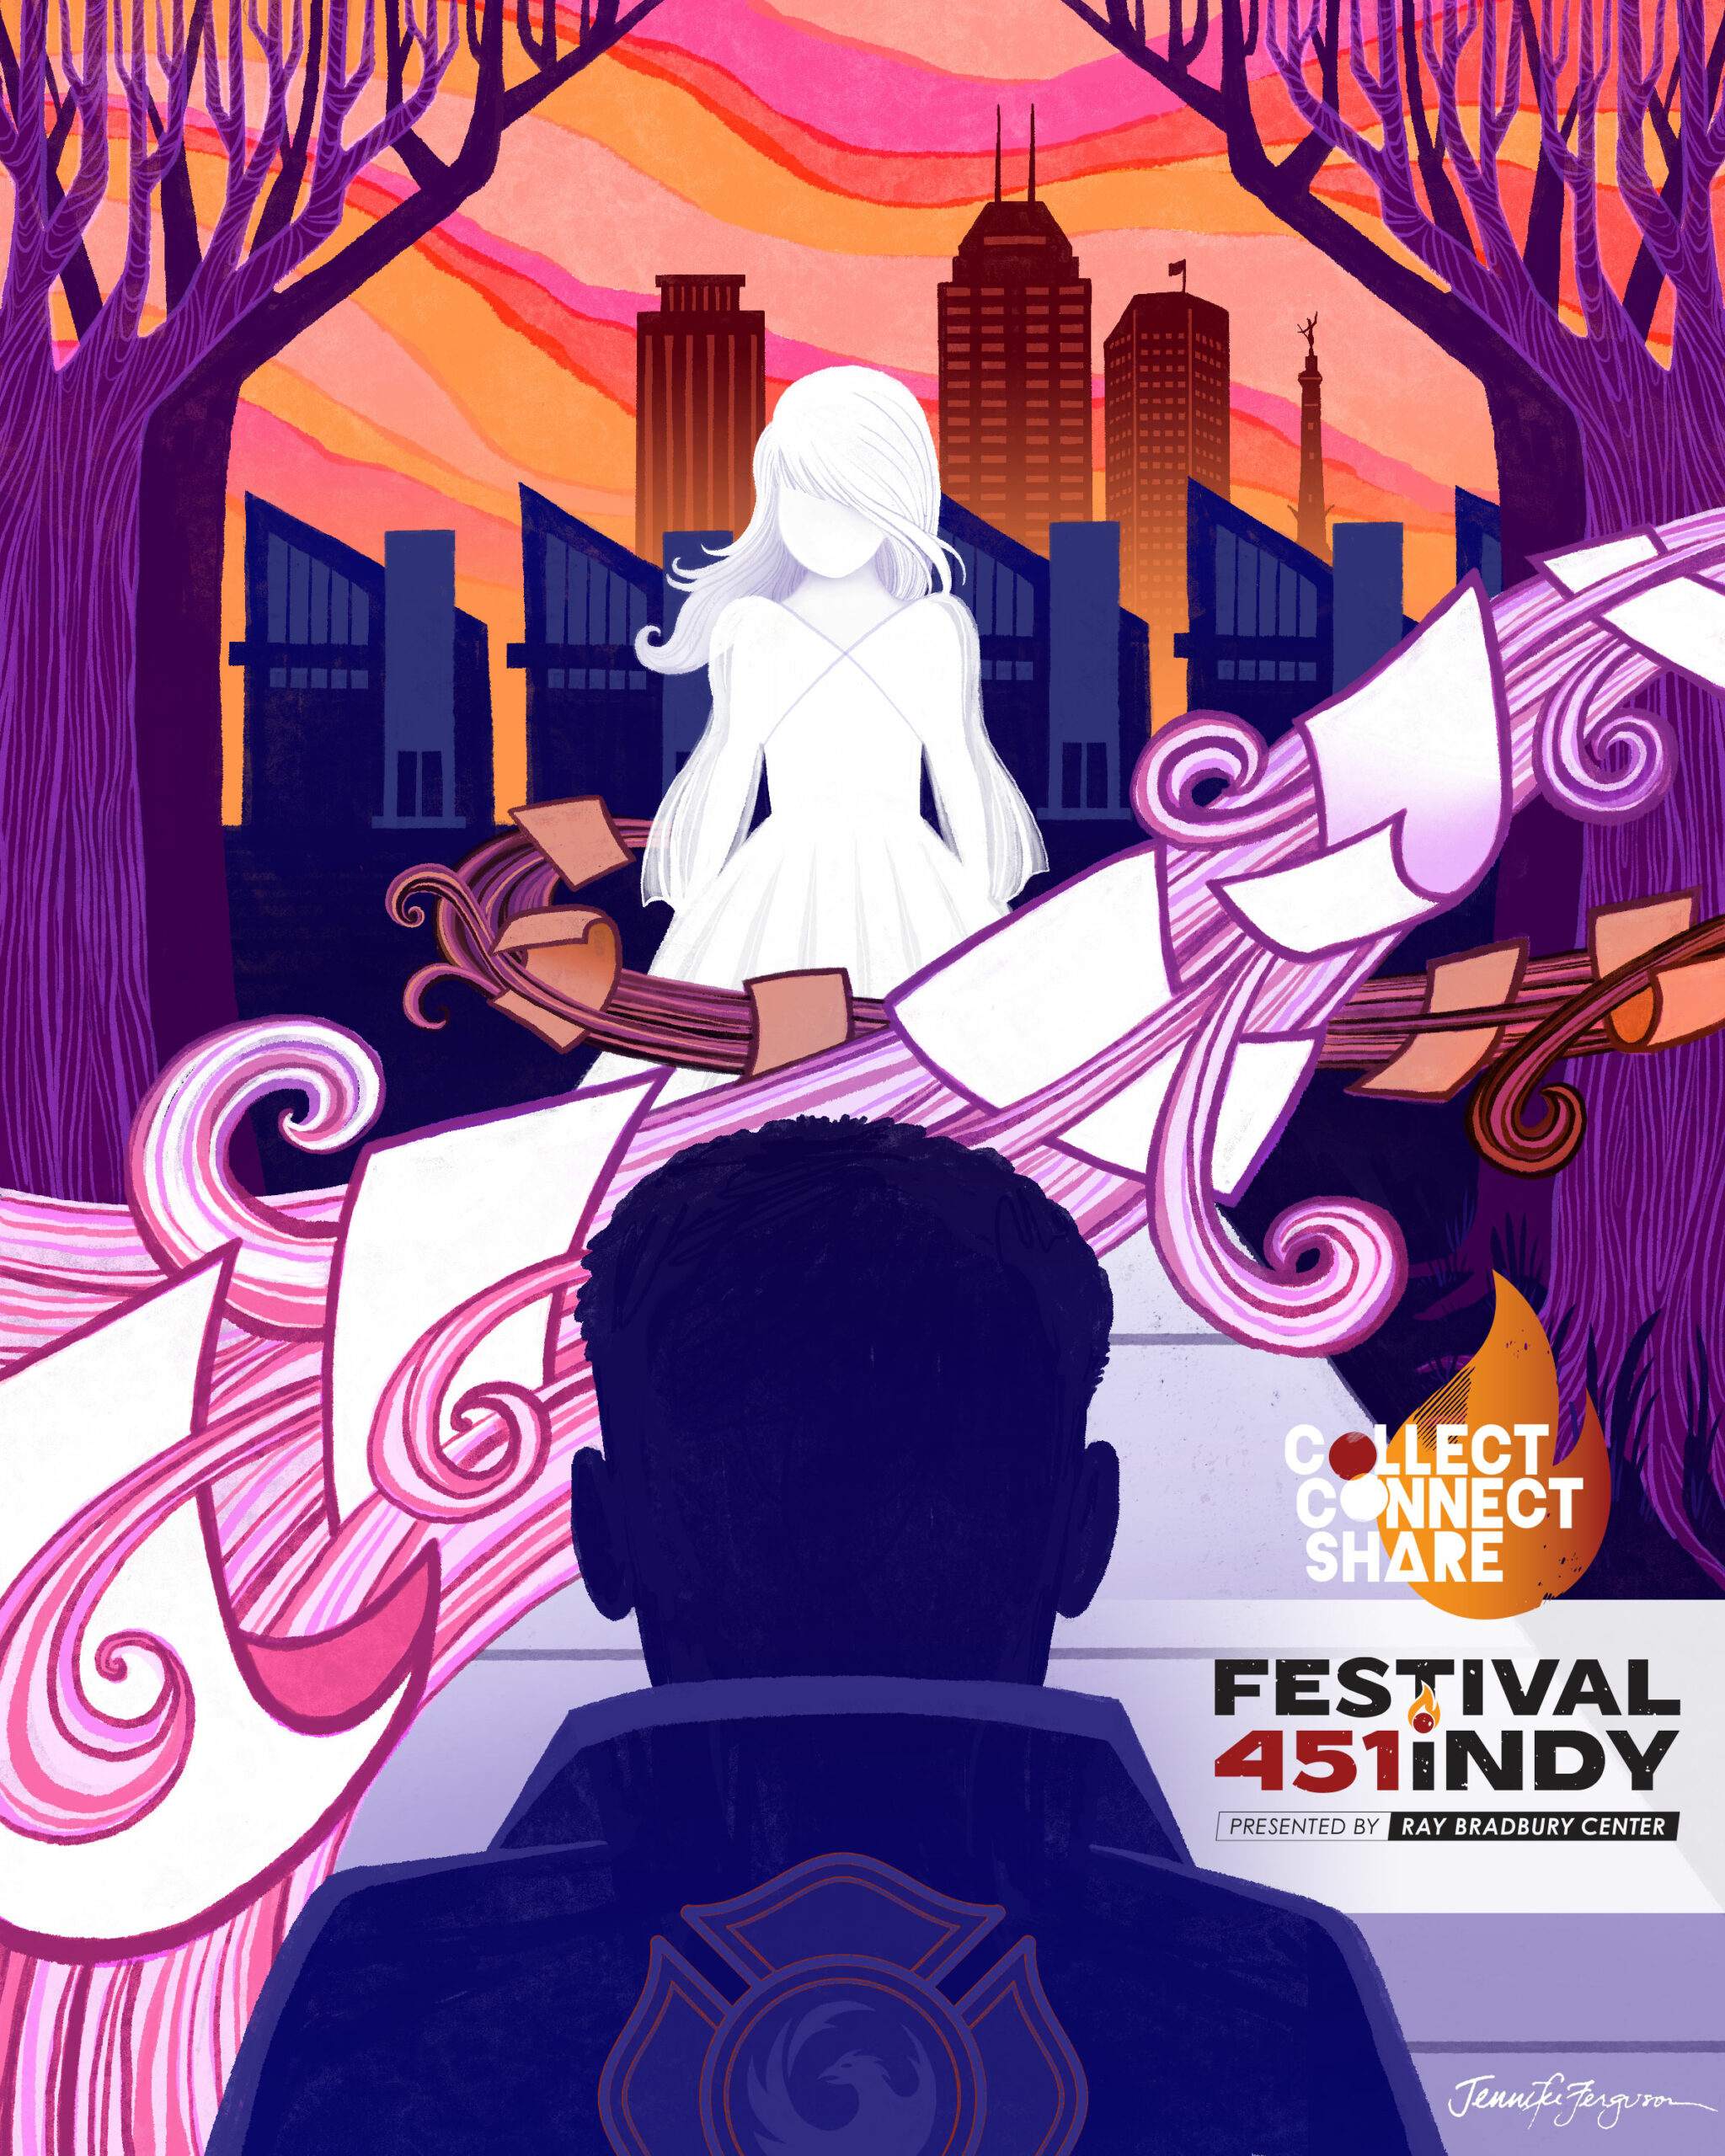 Festival 451indy to take place in September 2023